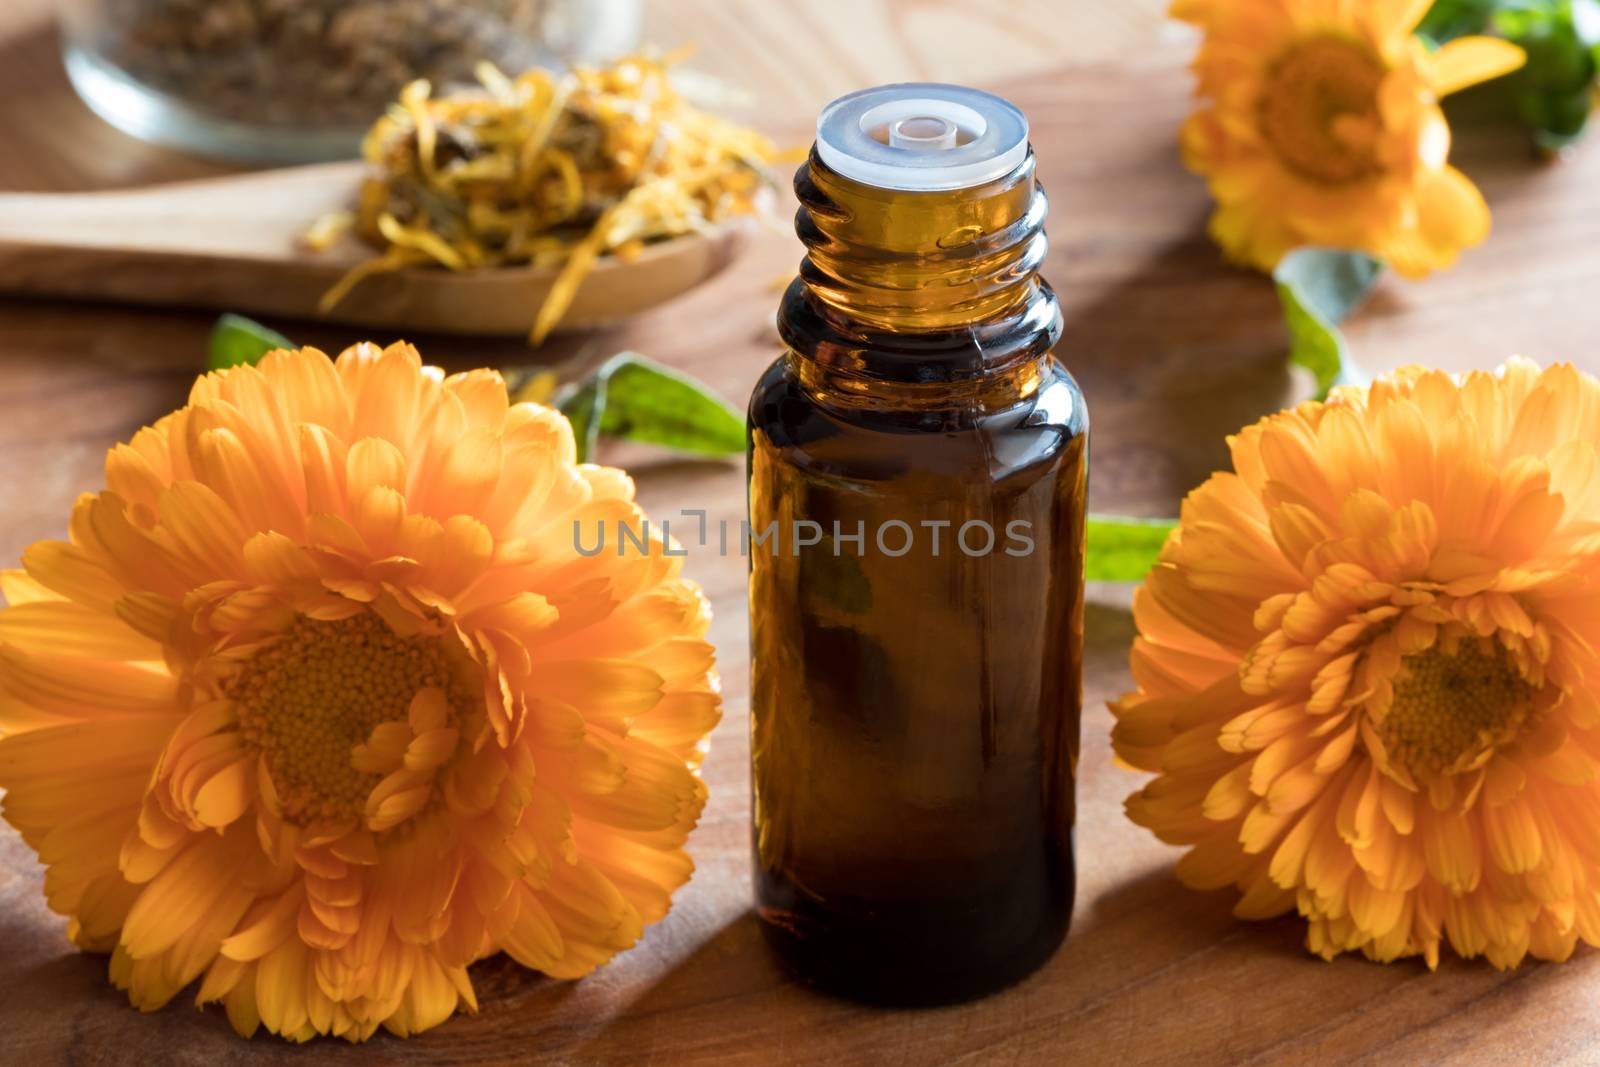 A dark bottle of calendula essential oil on a wooden table, with calendula flowers in the foreground